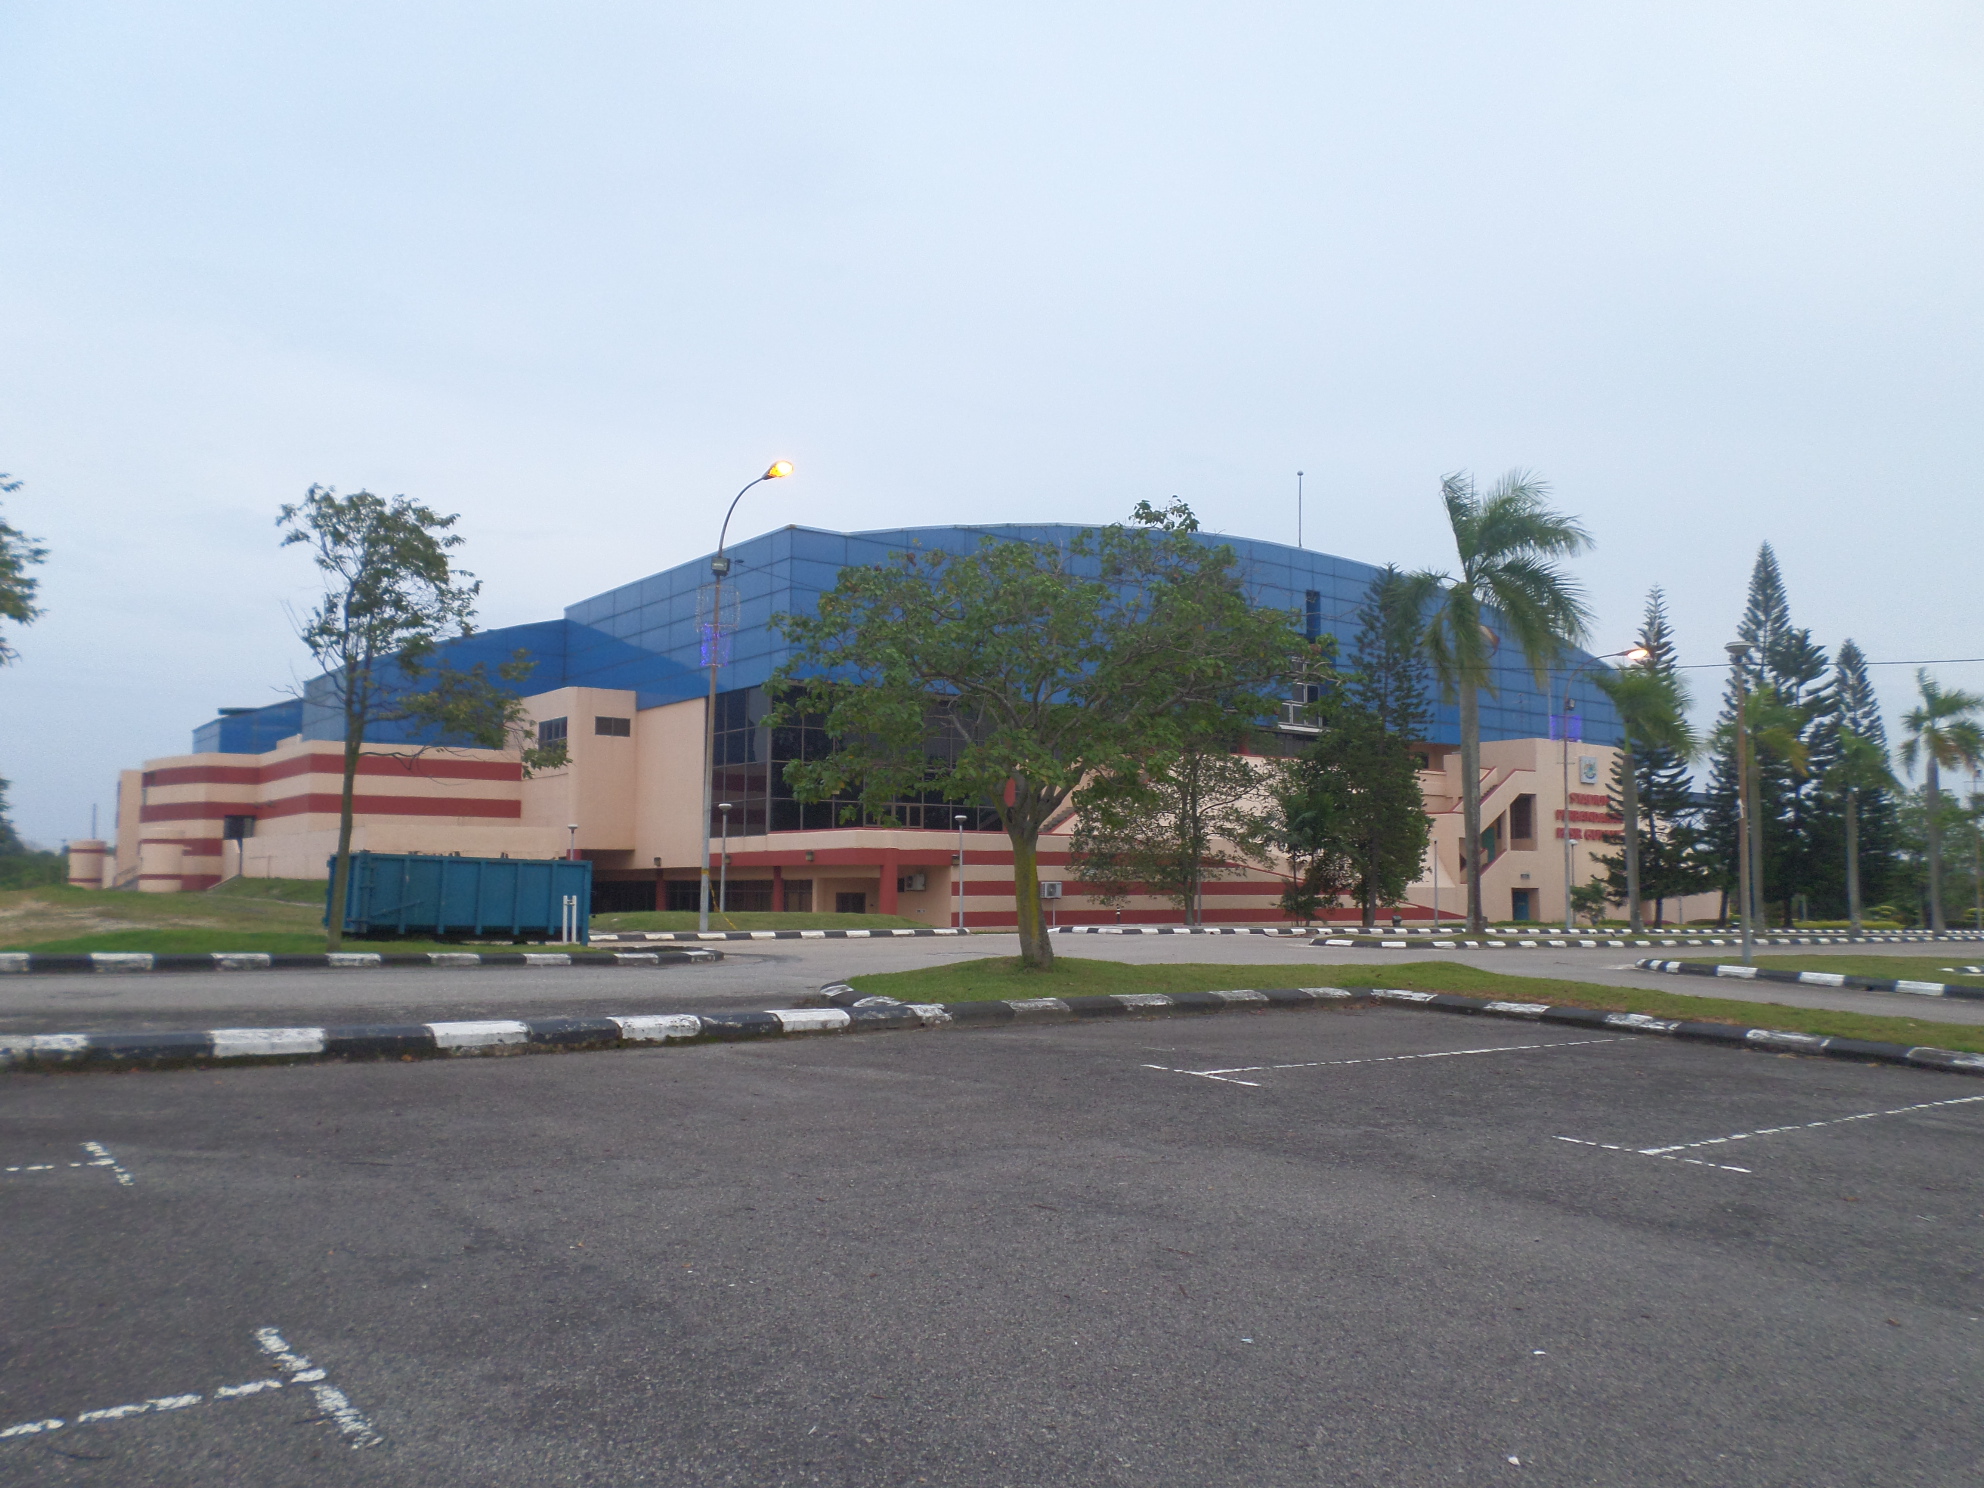 Pasir Gudang Corporation Stadium From Boothferry To Germany